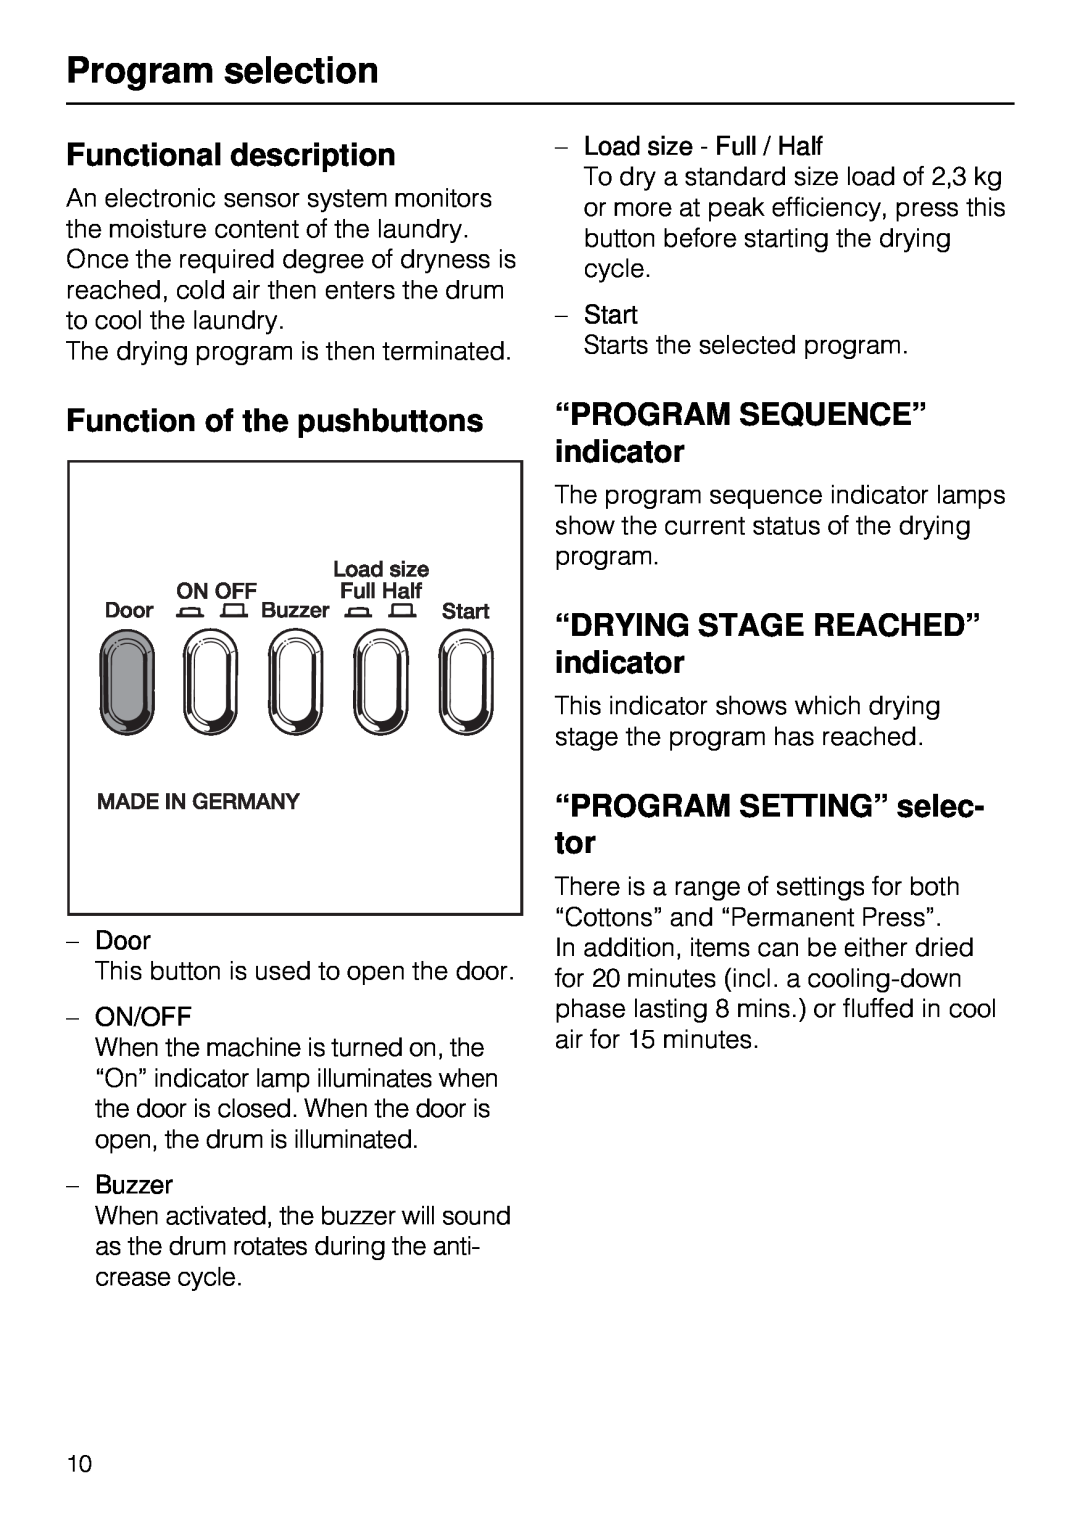 Miele T 1515 Program selection, Functional description, Function of the pushbuttons, “Program Sequence”, indicator 